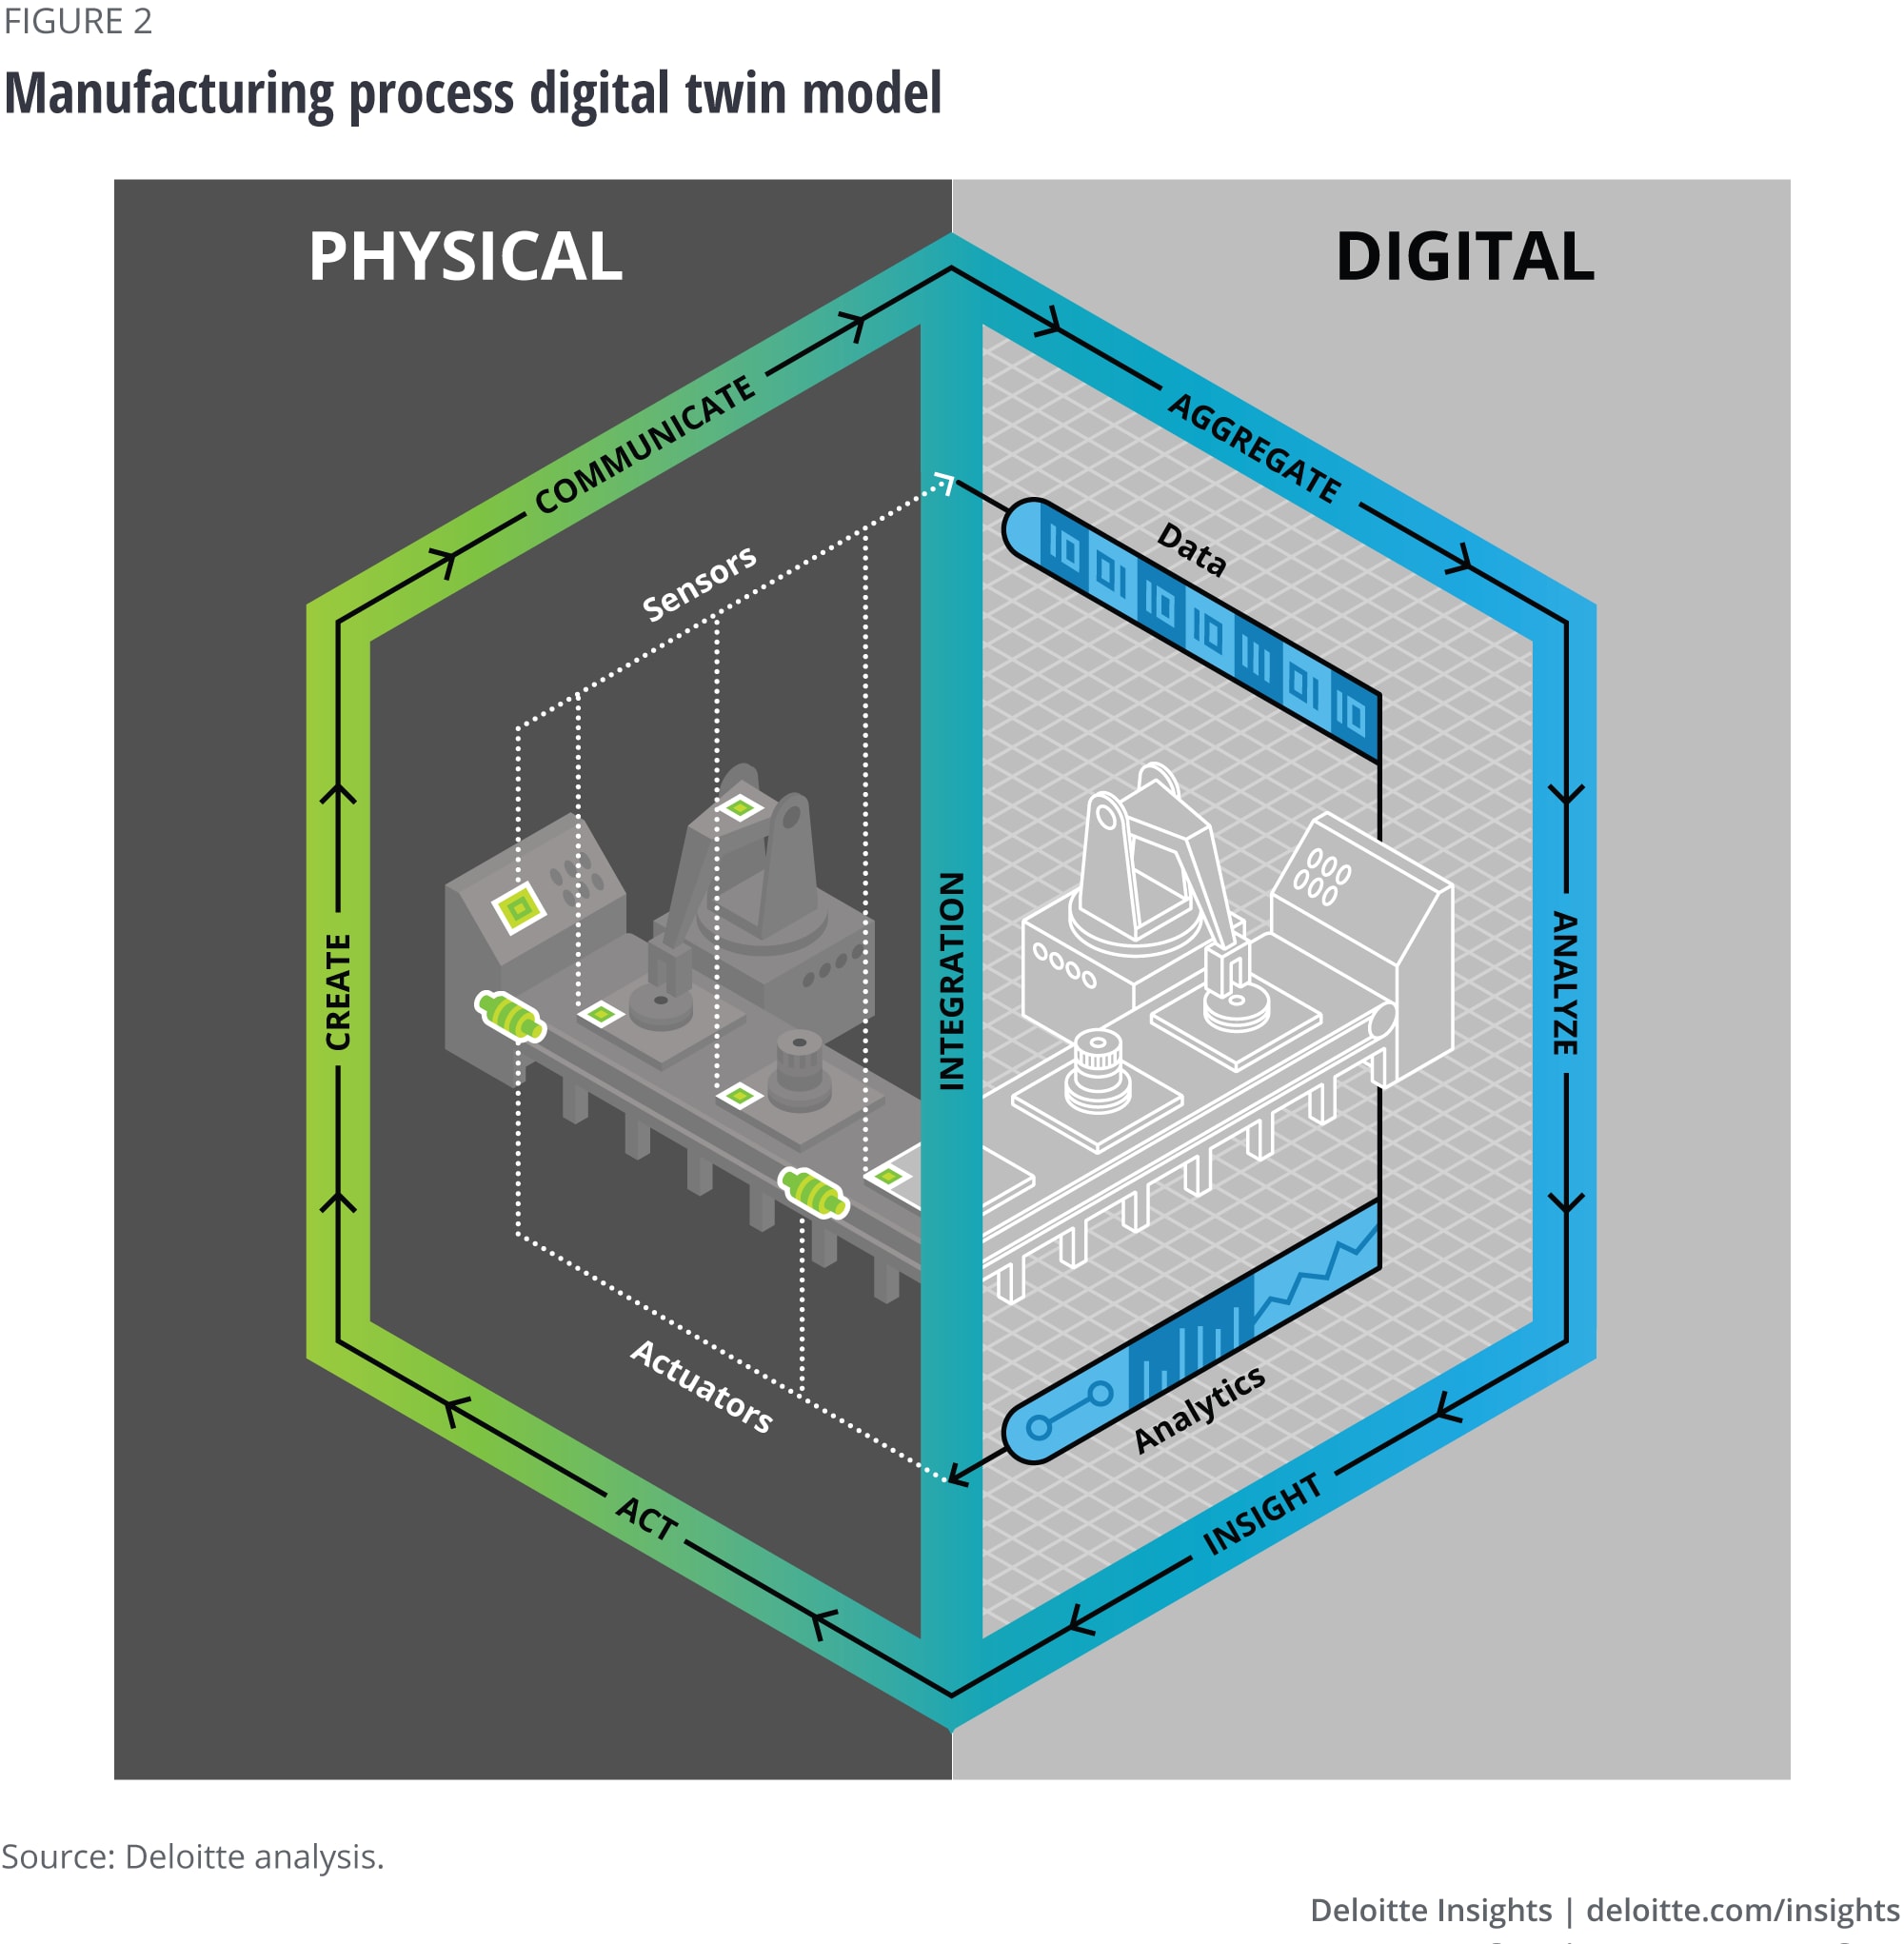 A sample process digital twin for manufacturing